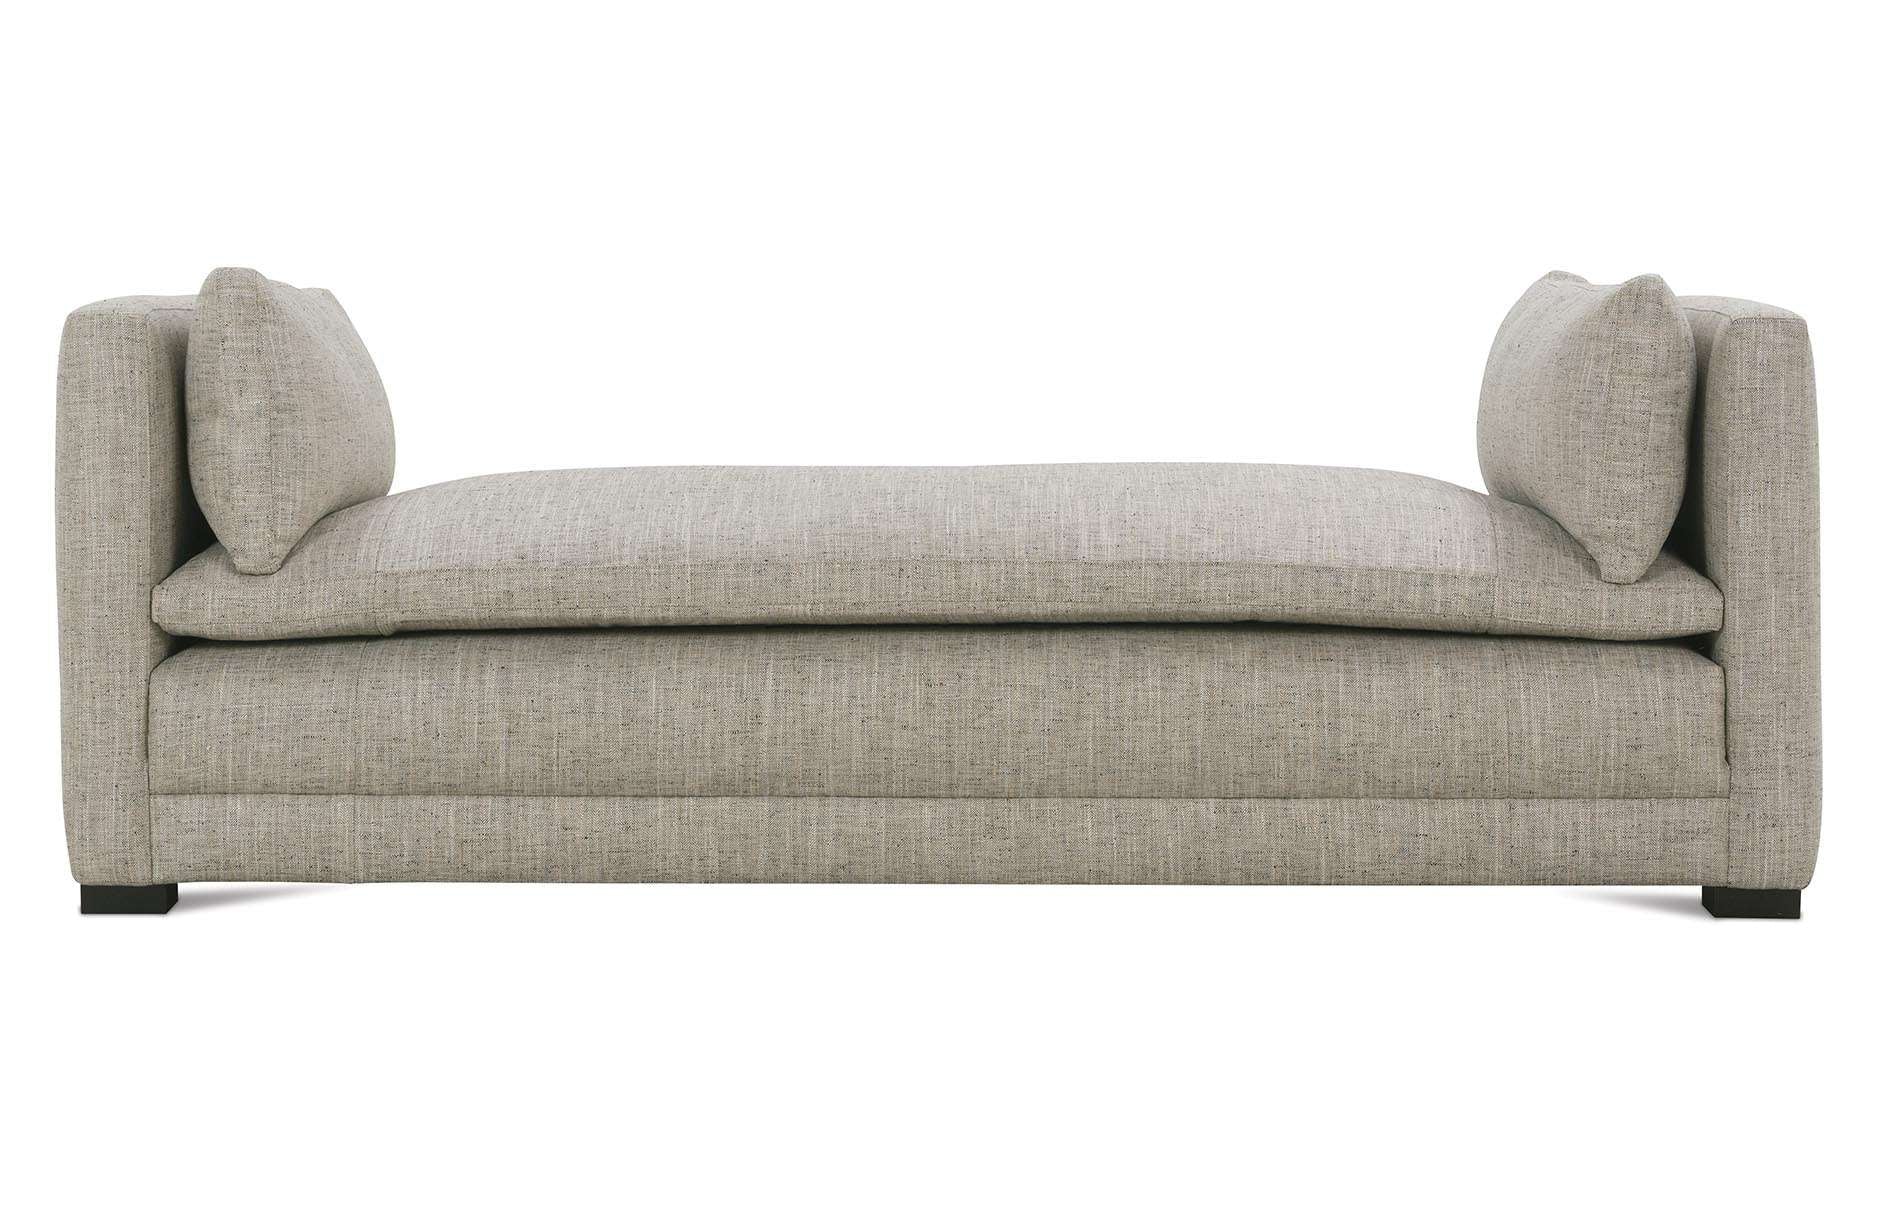 Ellice Day Lounger